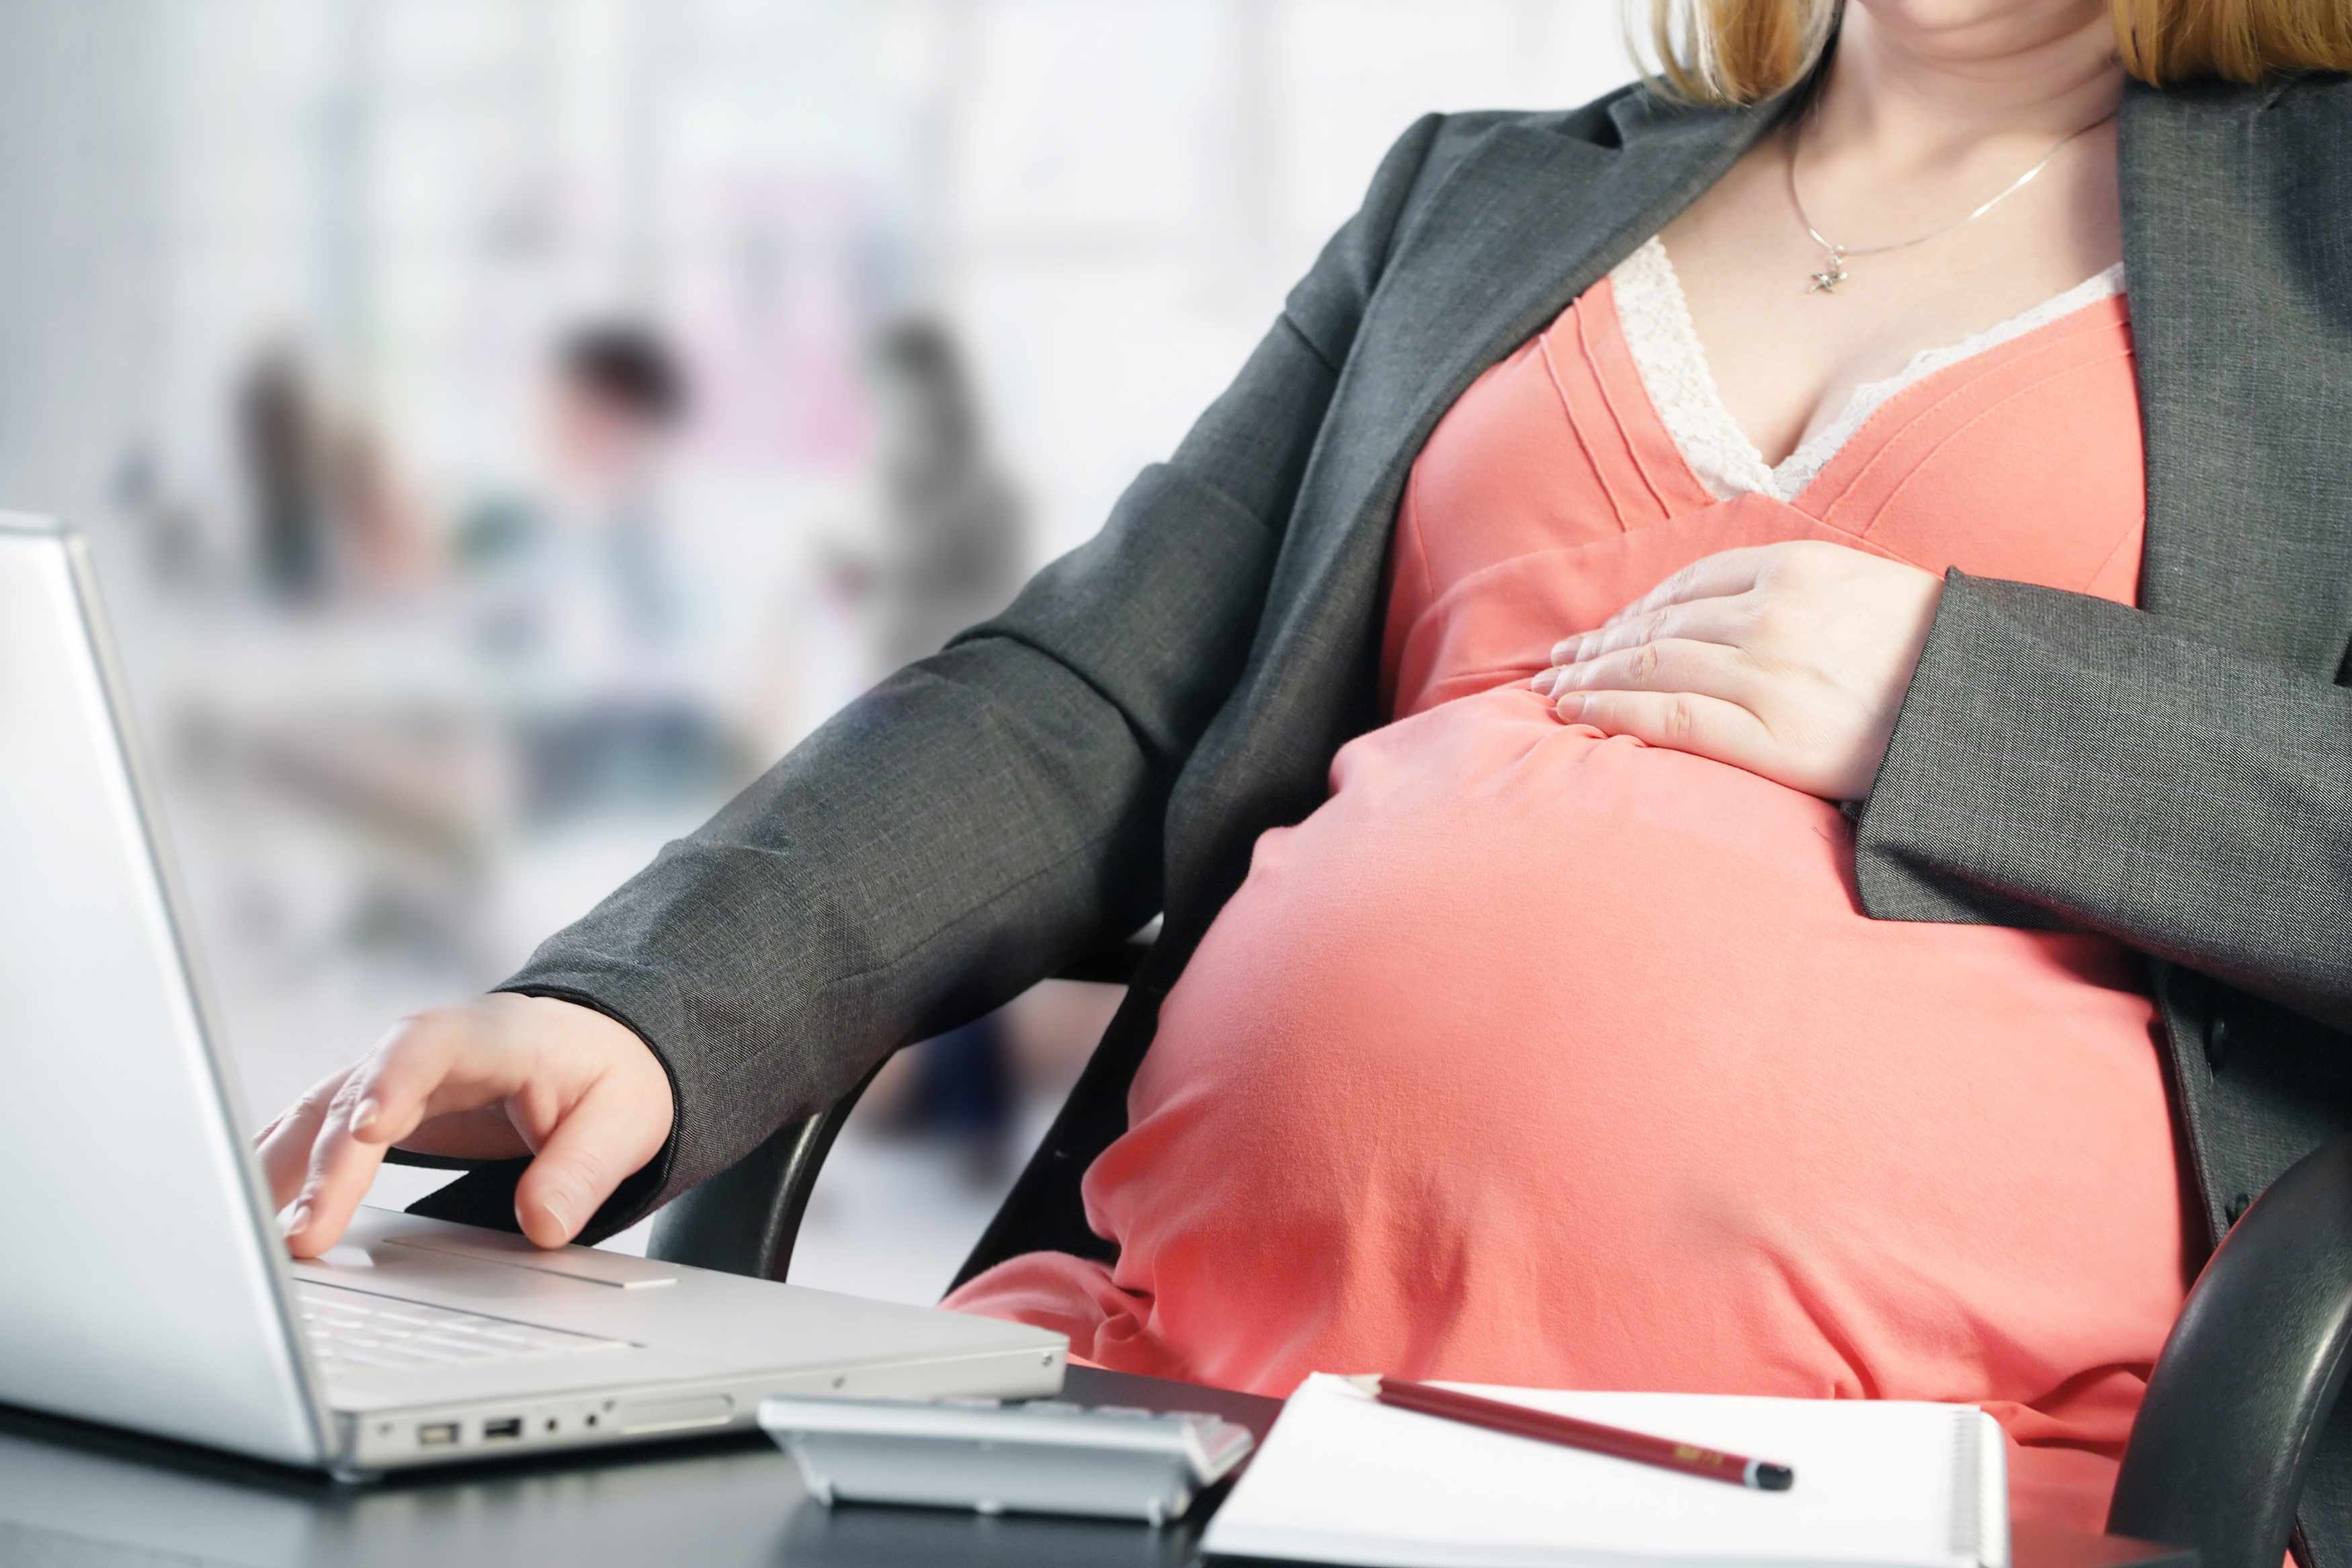 a young pregnant woman sitting at work on a laptop computer